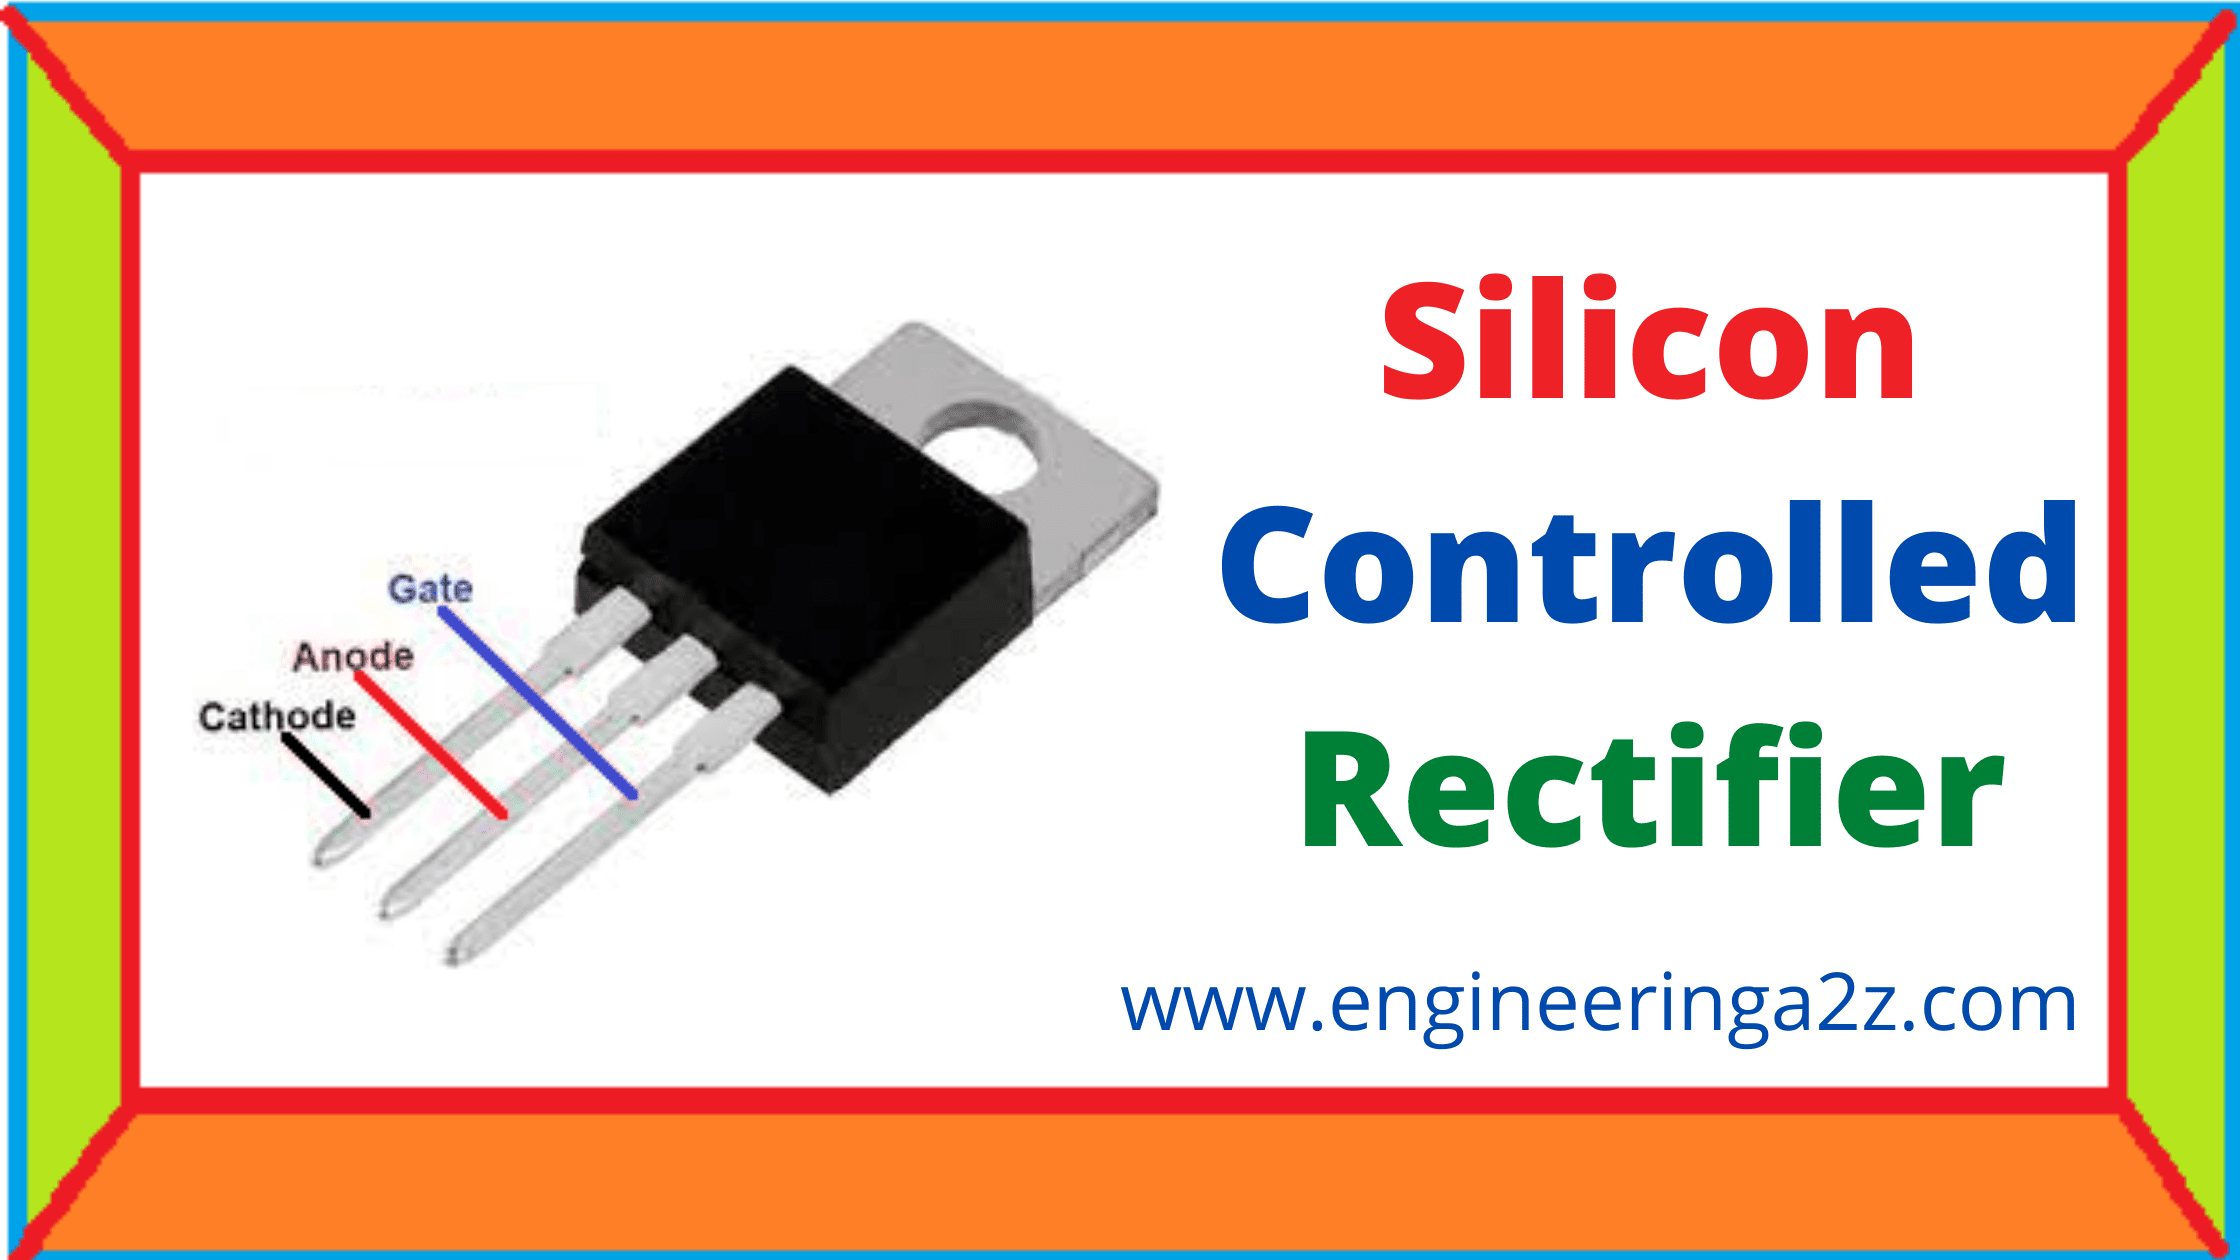 SCR, silicon controlled rectifier